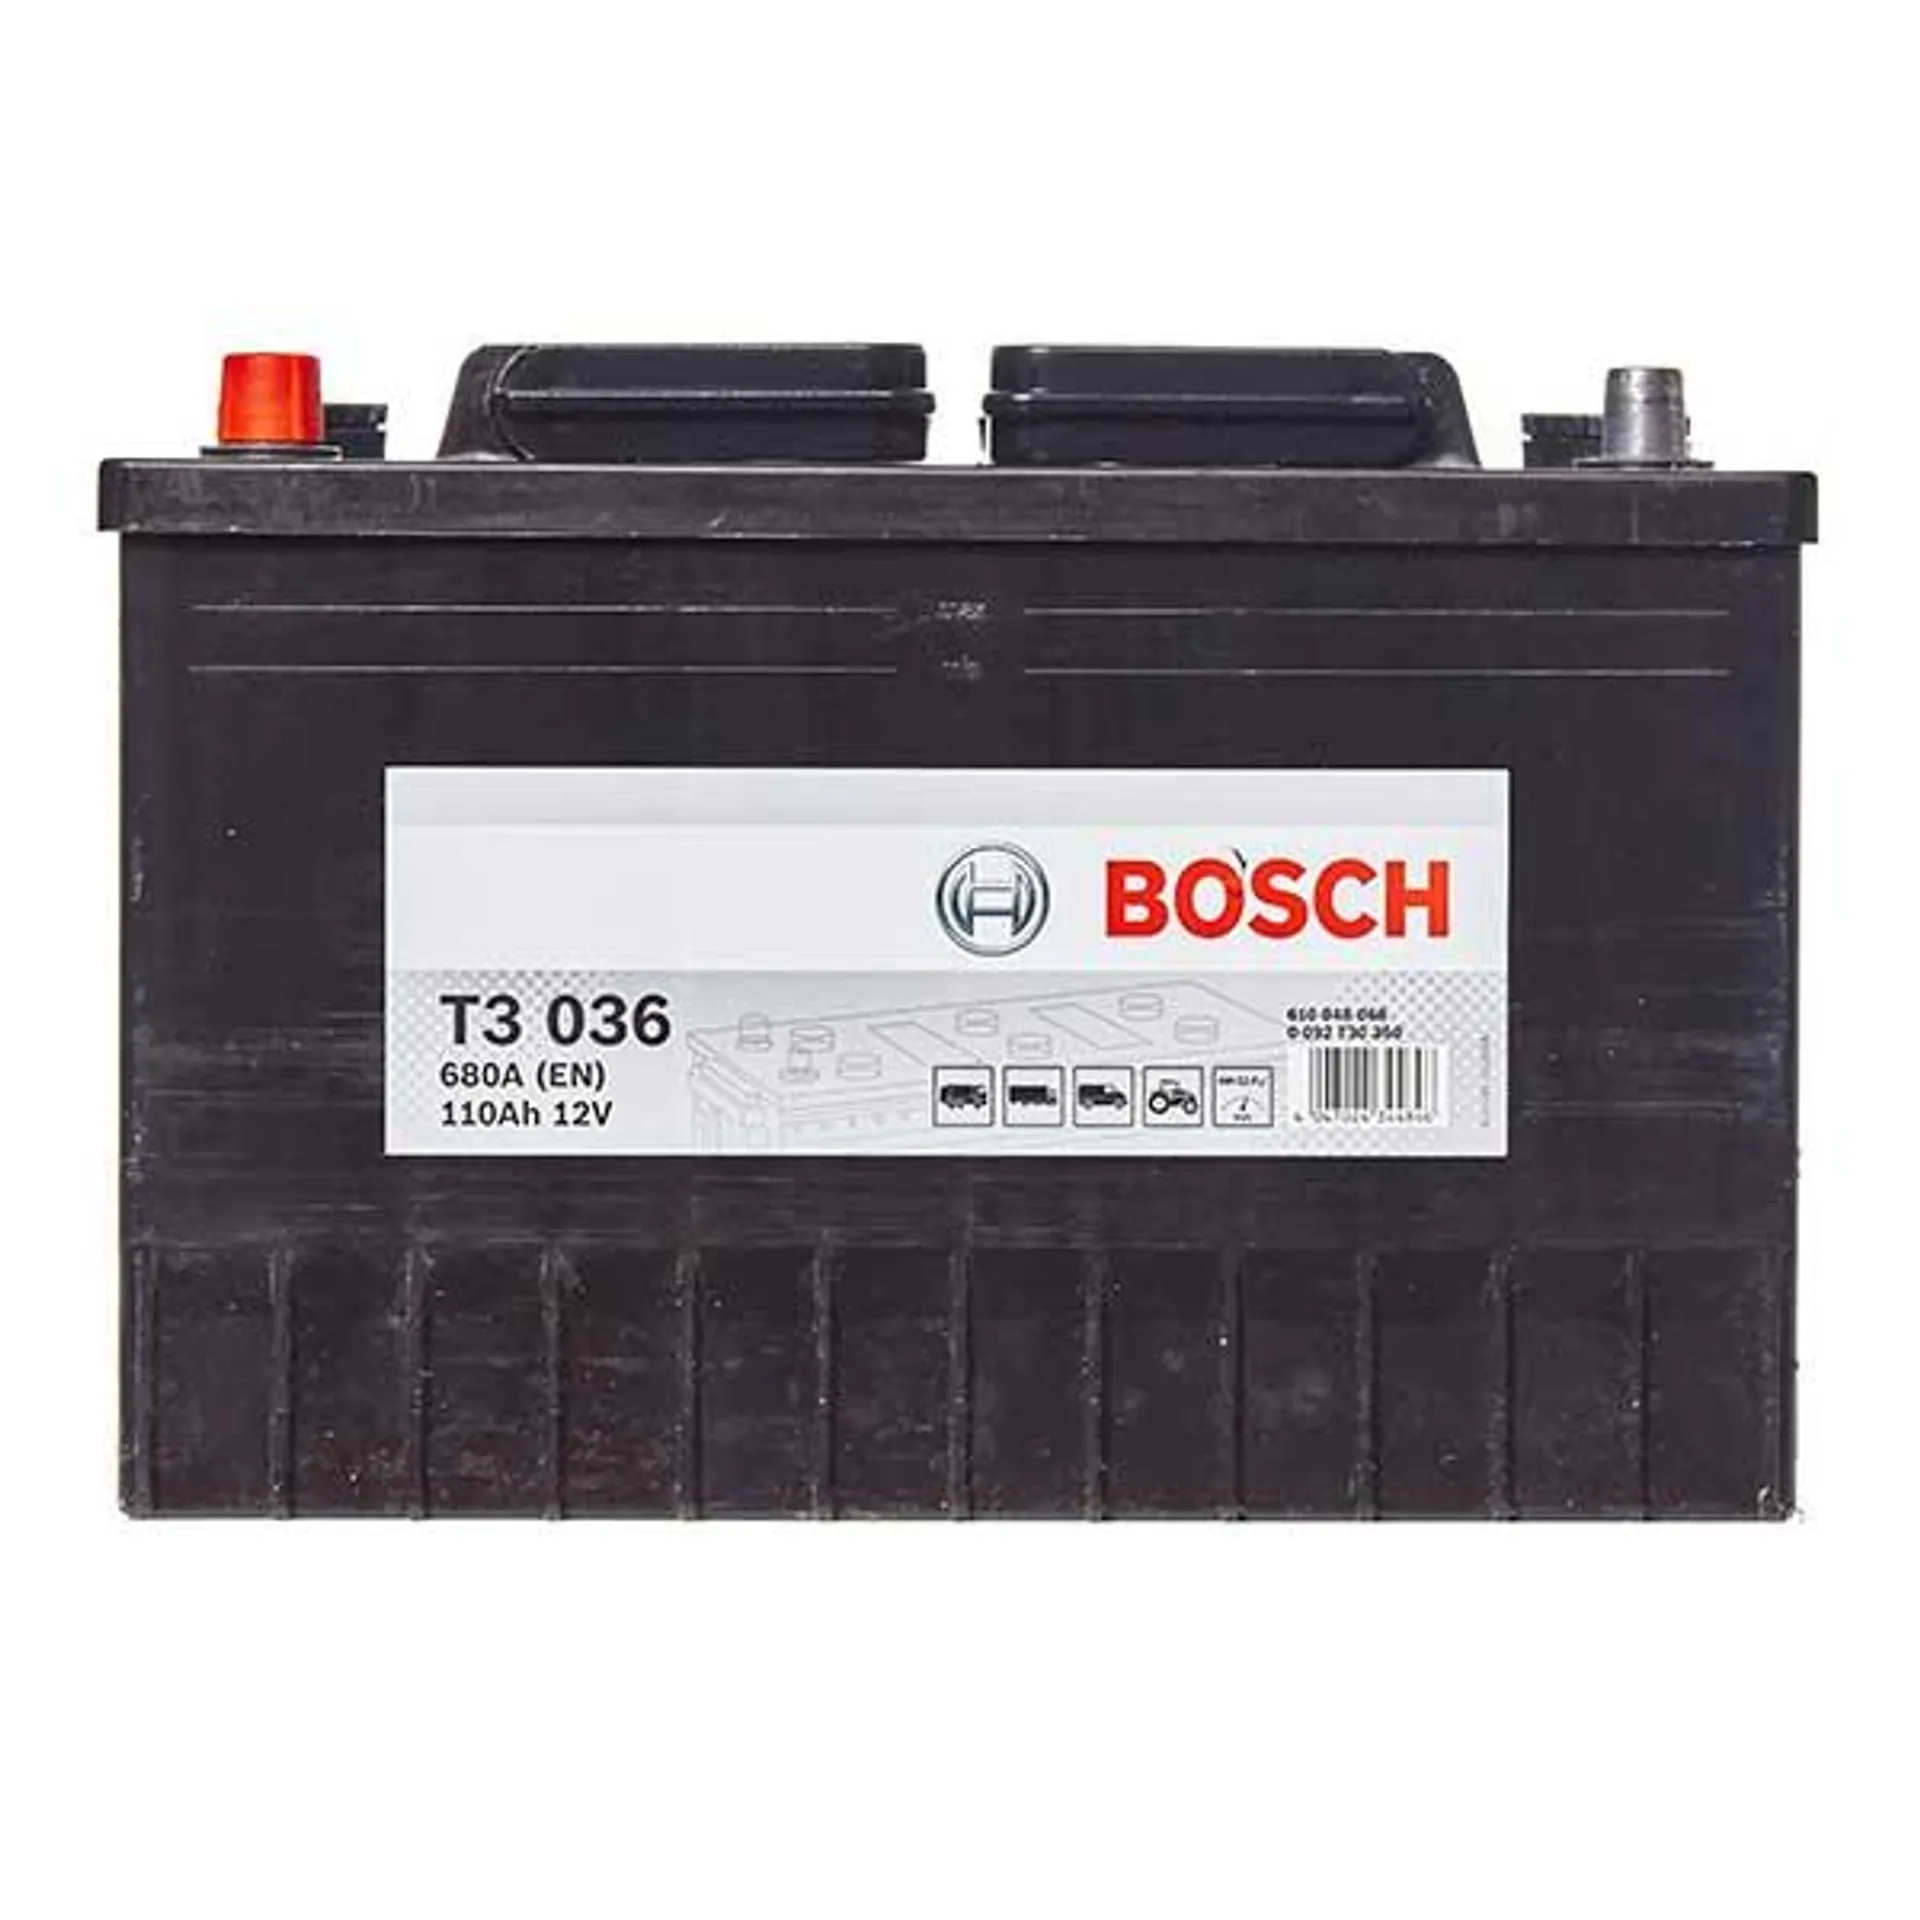 Bosch Commercial Battery 664 - 2 Year Guarantee